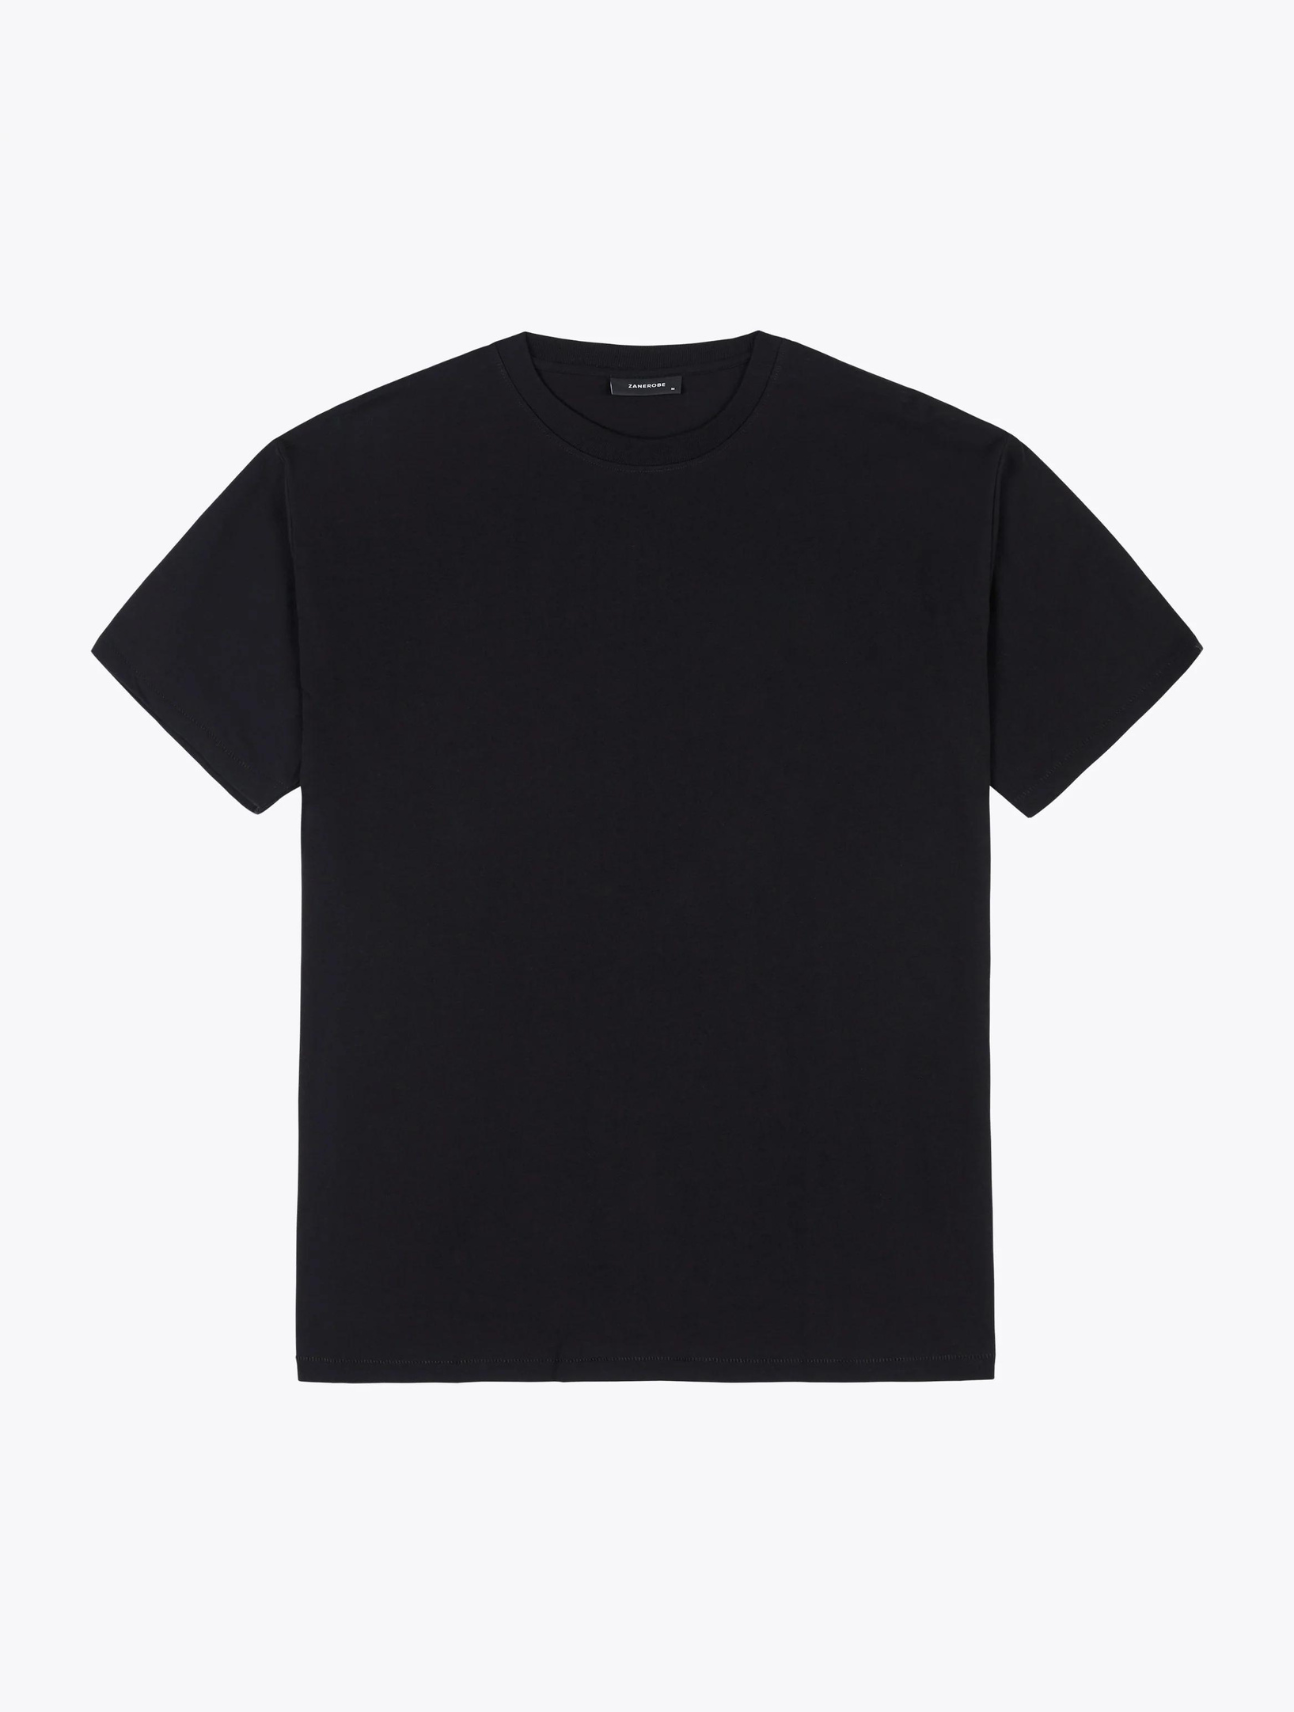 BOXY Fit Black T-Shirt Essential - 100% Organic Cotton Made In Canada –  Gabe Clothing